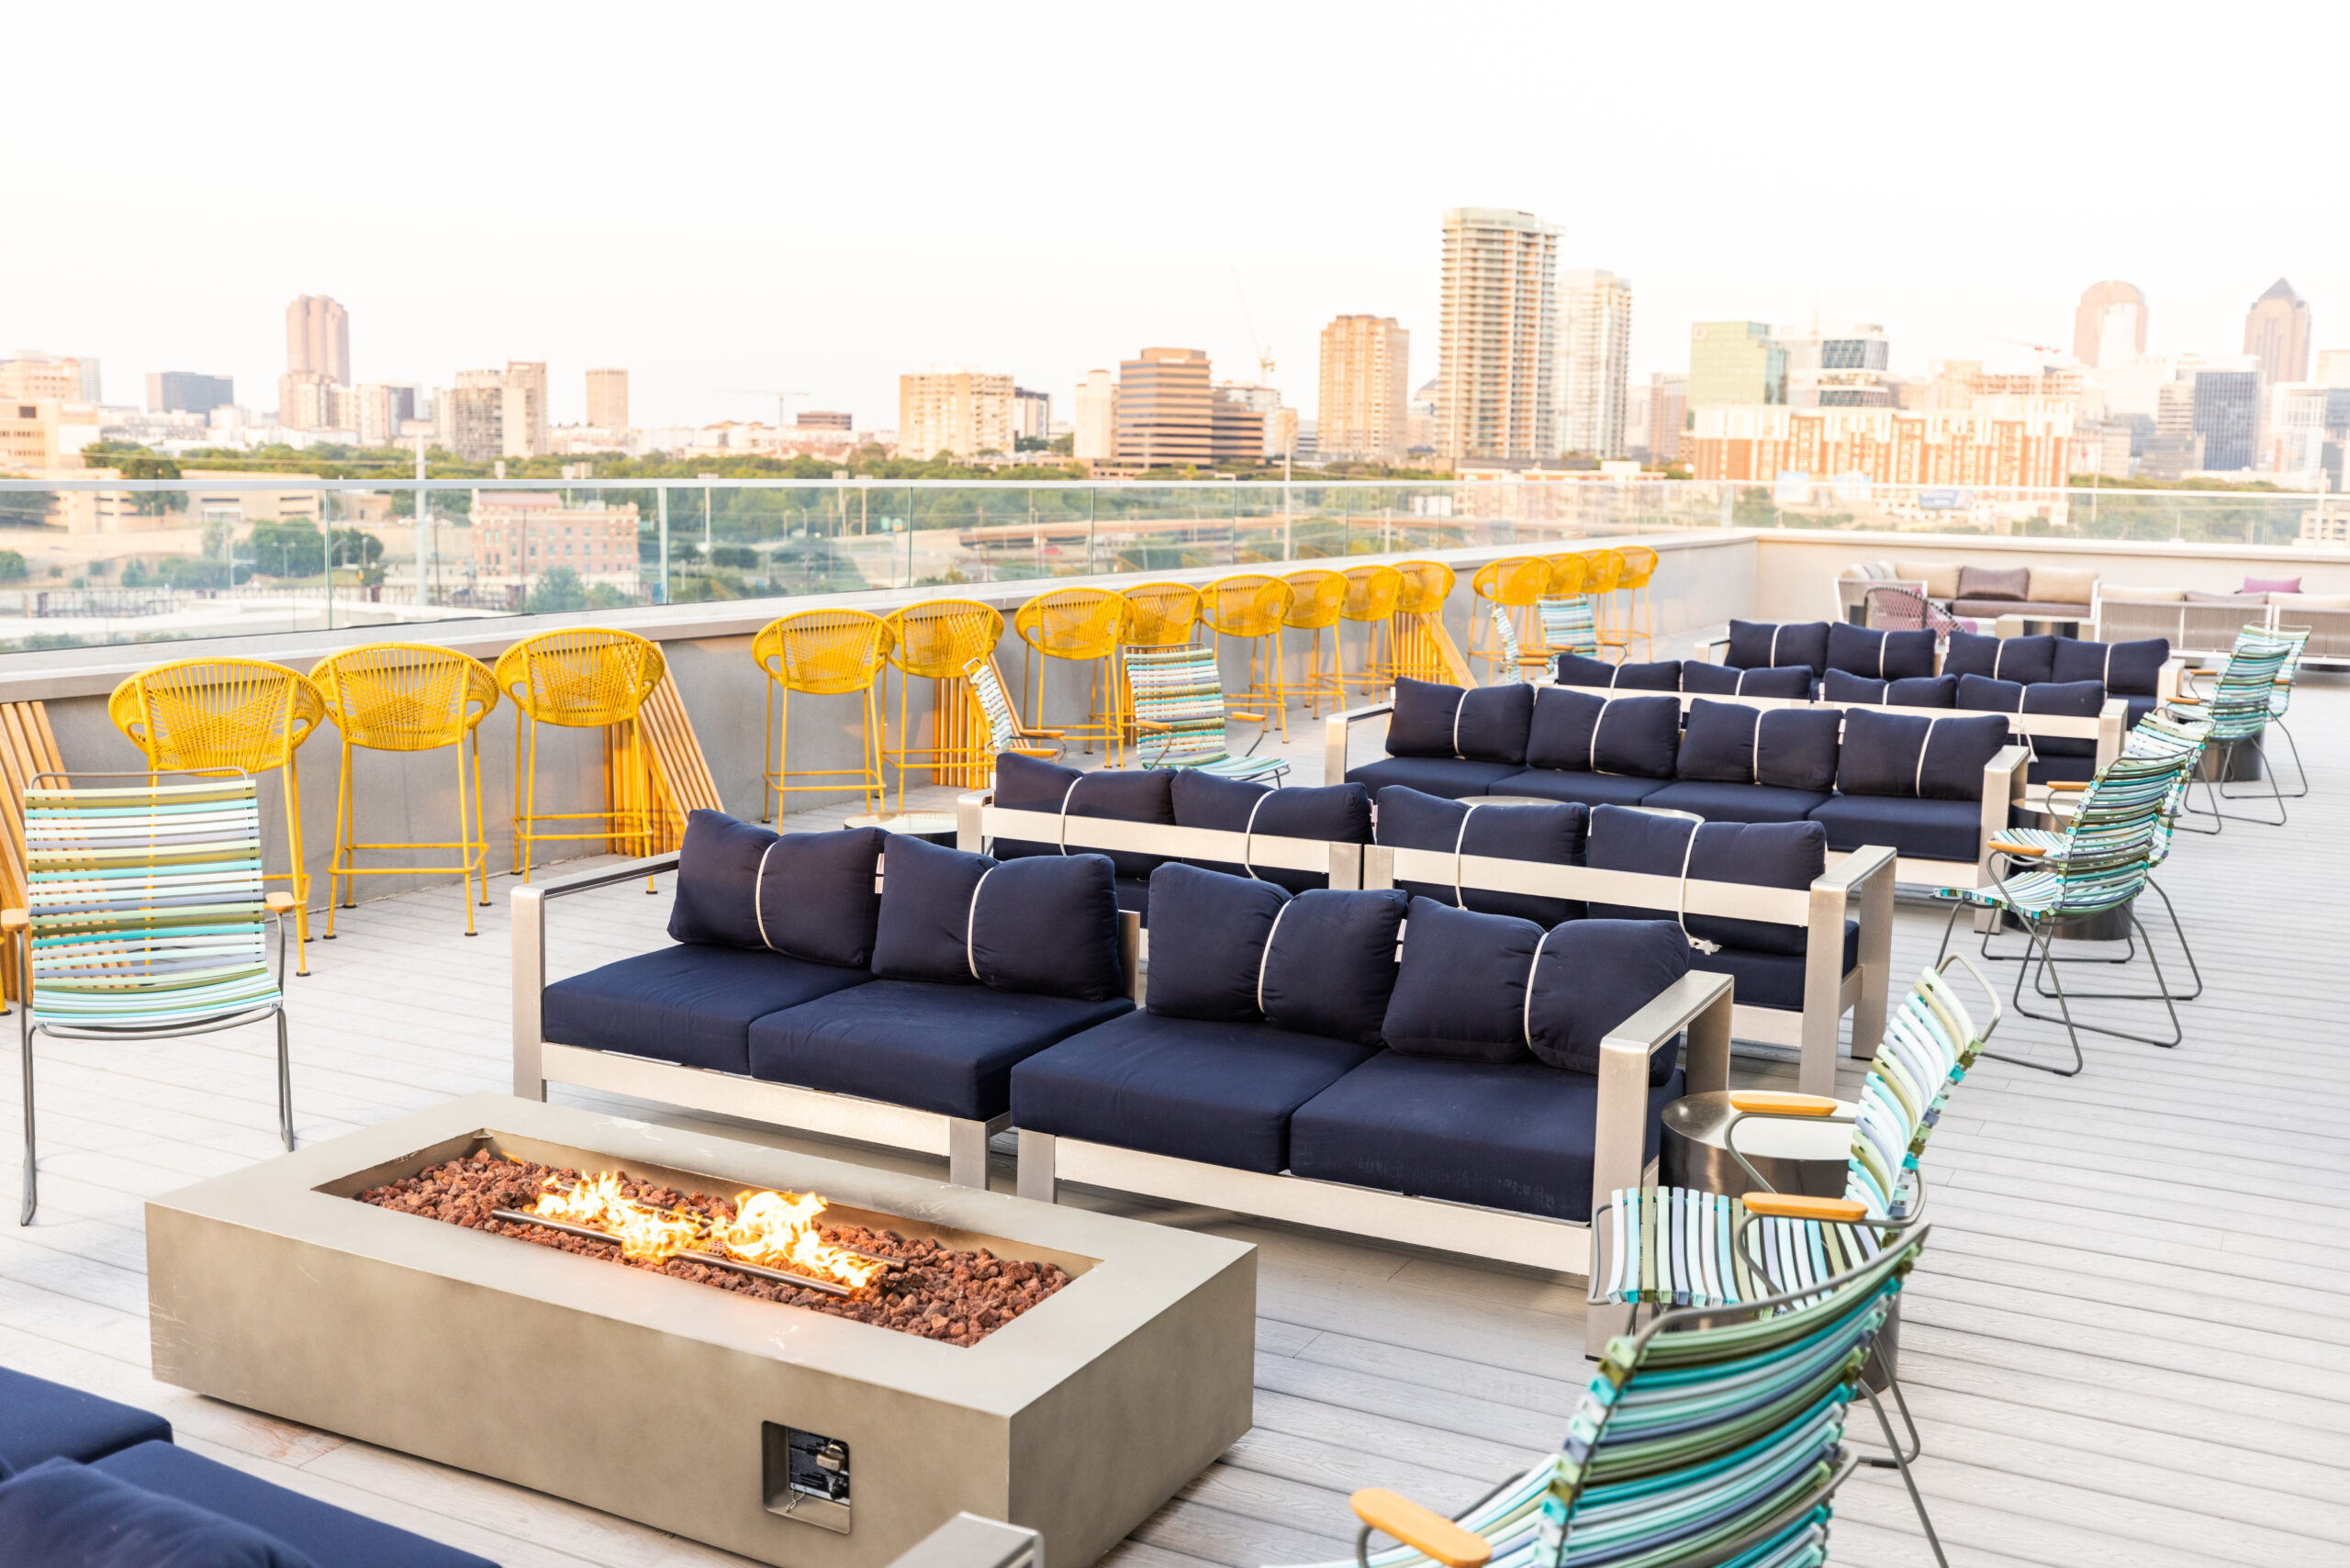 Sky Blu Rooftop Bar To Open in Design District Tomorrow